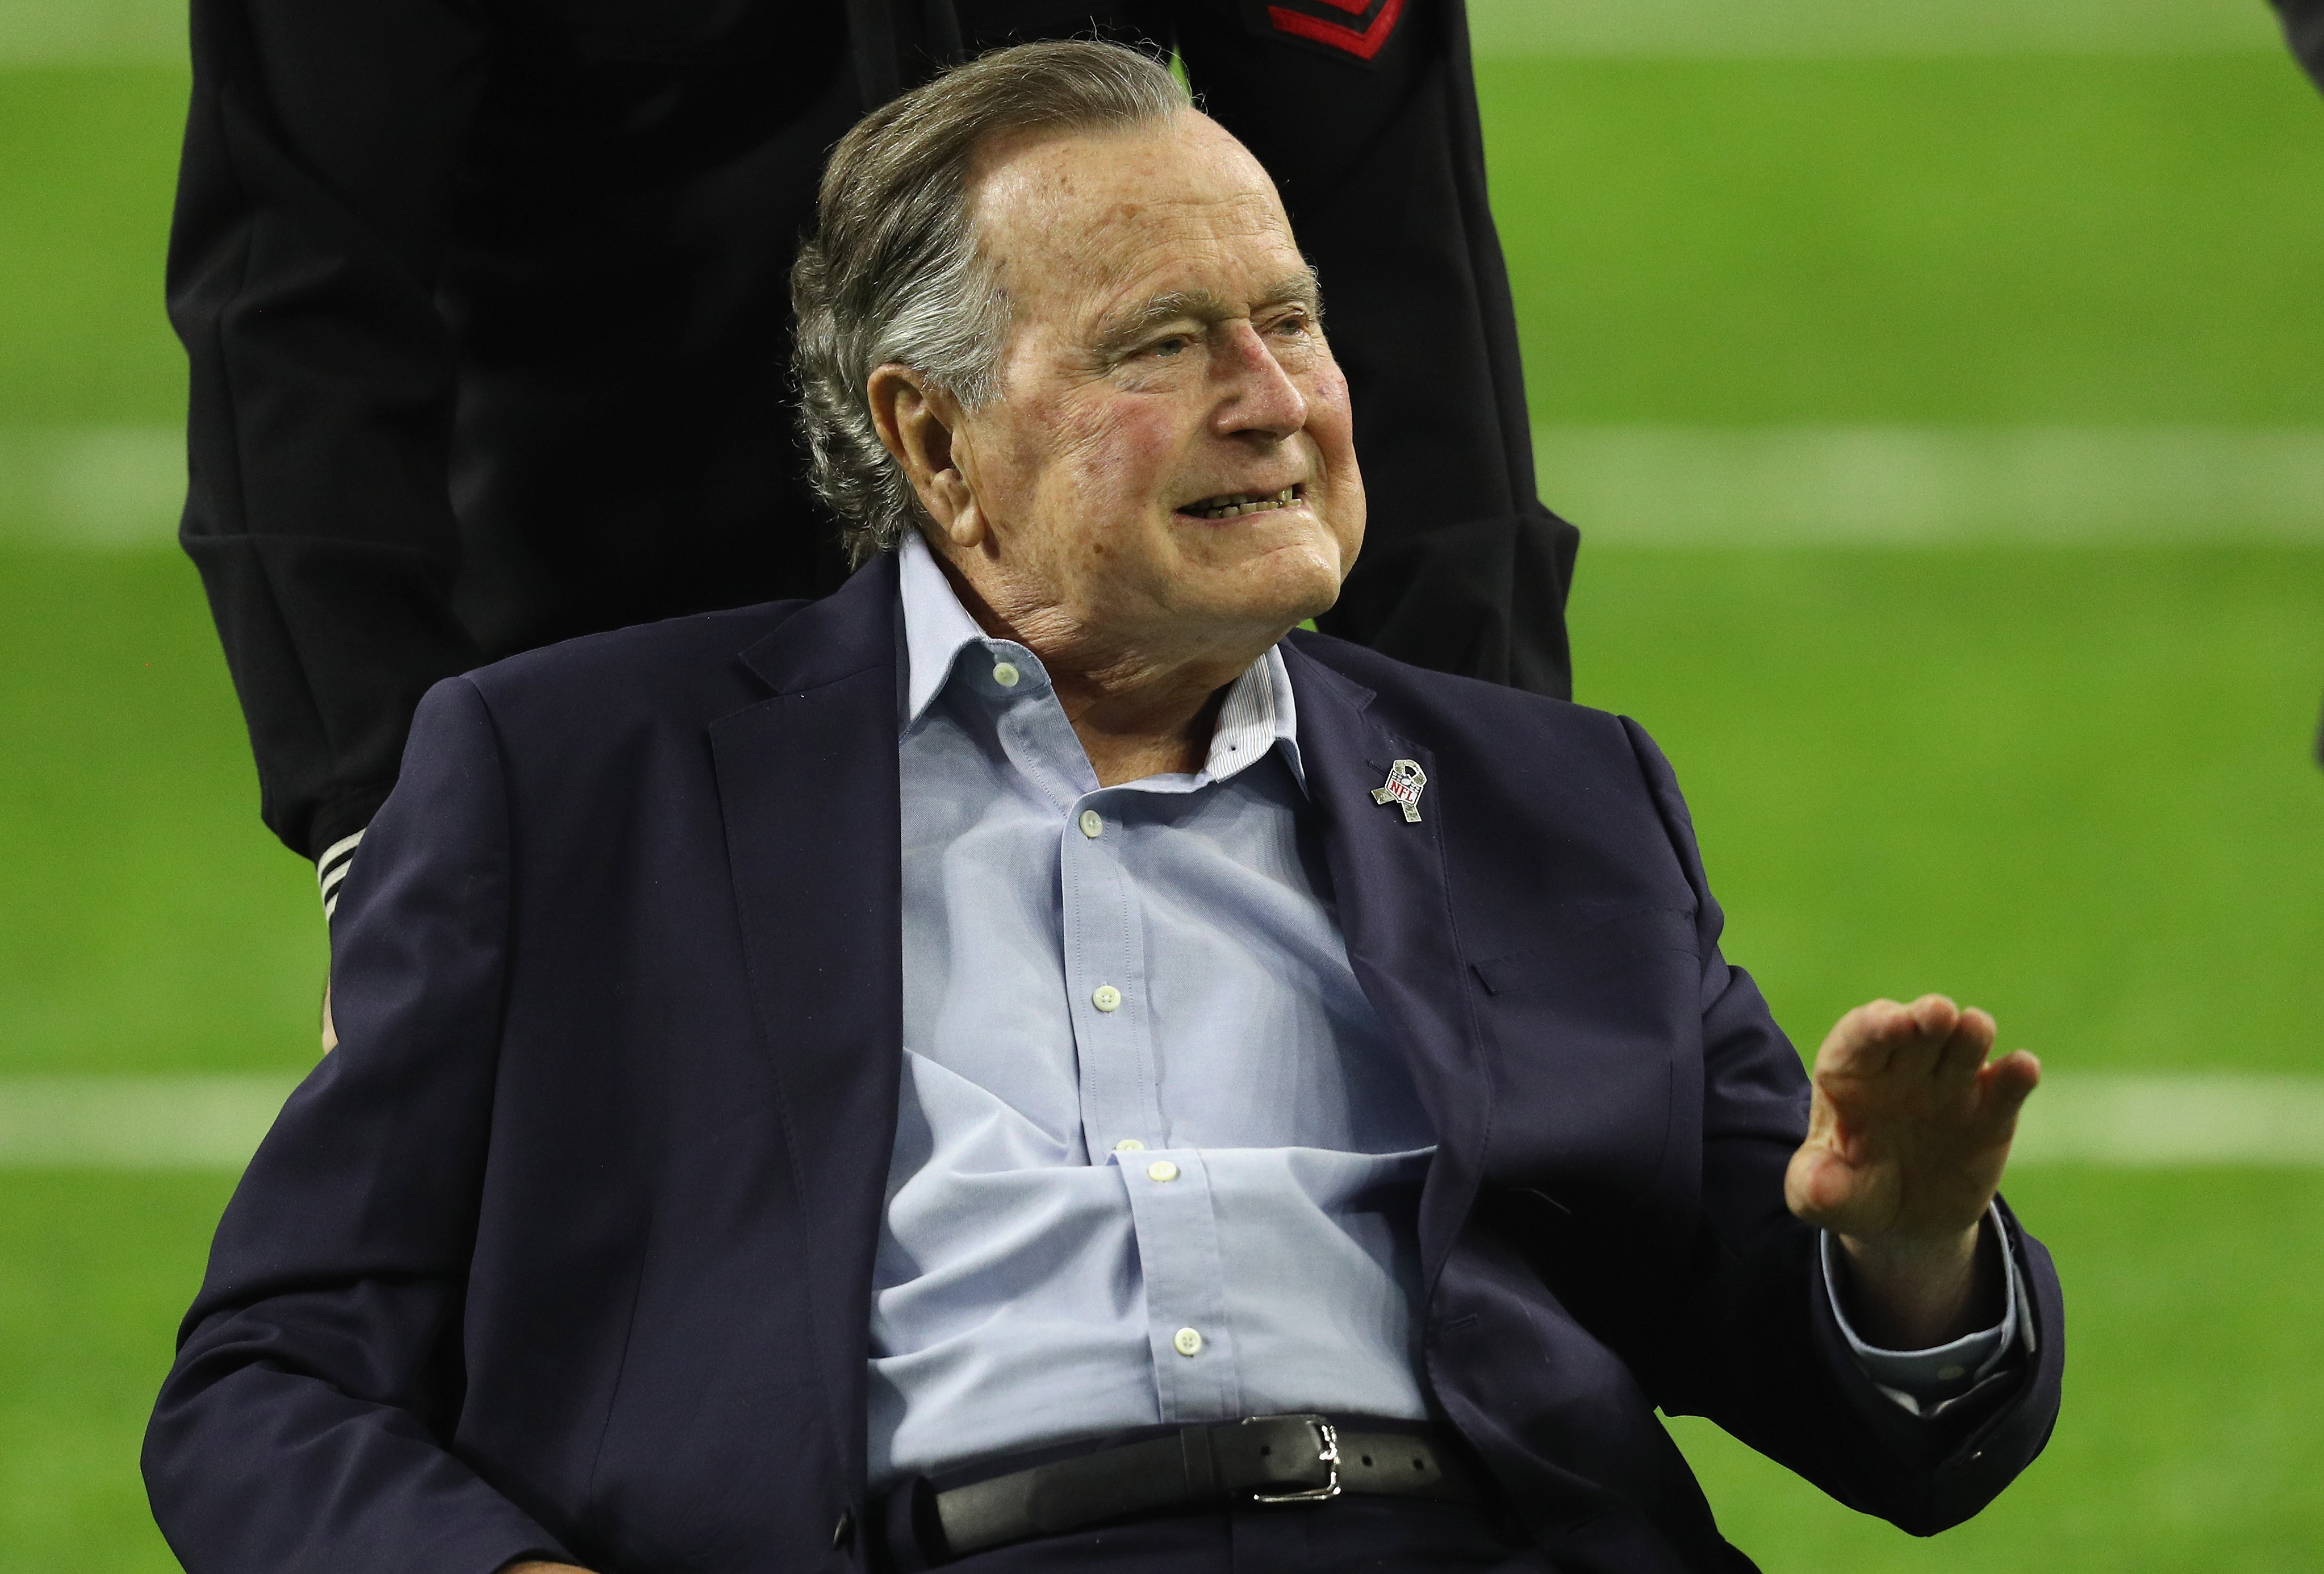 President George H.W. Bush arrives for the coin toss prior to Super Bowl 51 between the Atlanta Falcons and the New England Patriots at NRG Stadium on February 5, 2017 in Houston. (Patrick Smith—Getty Images)